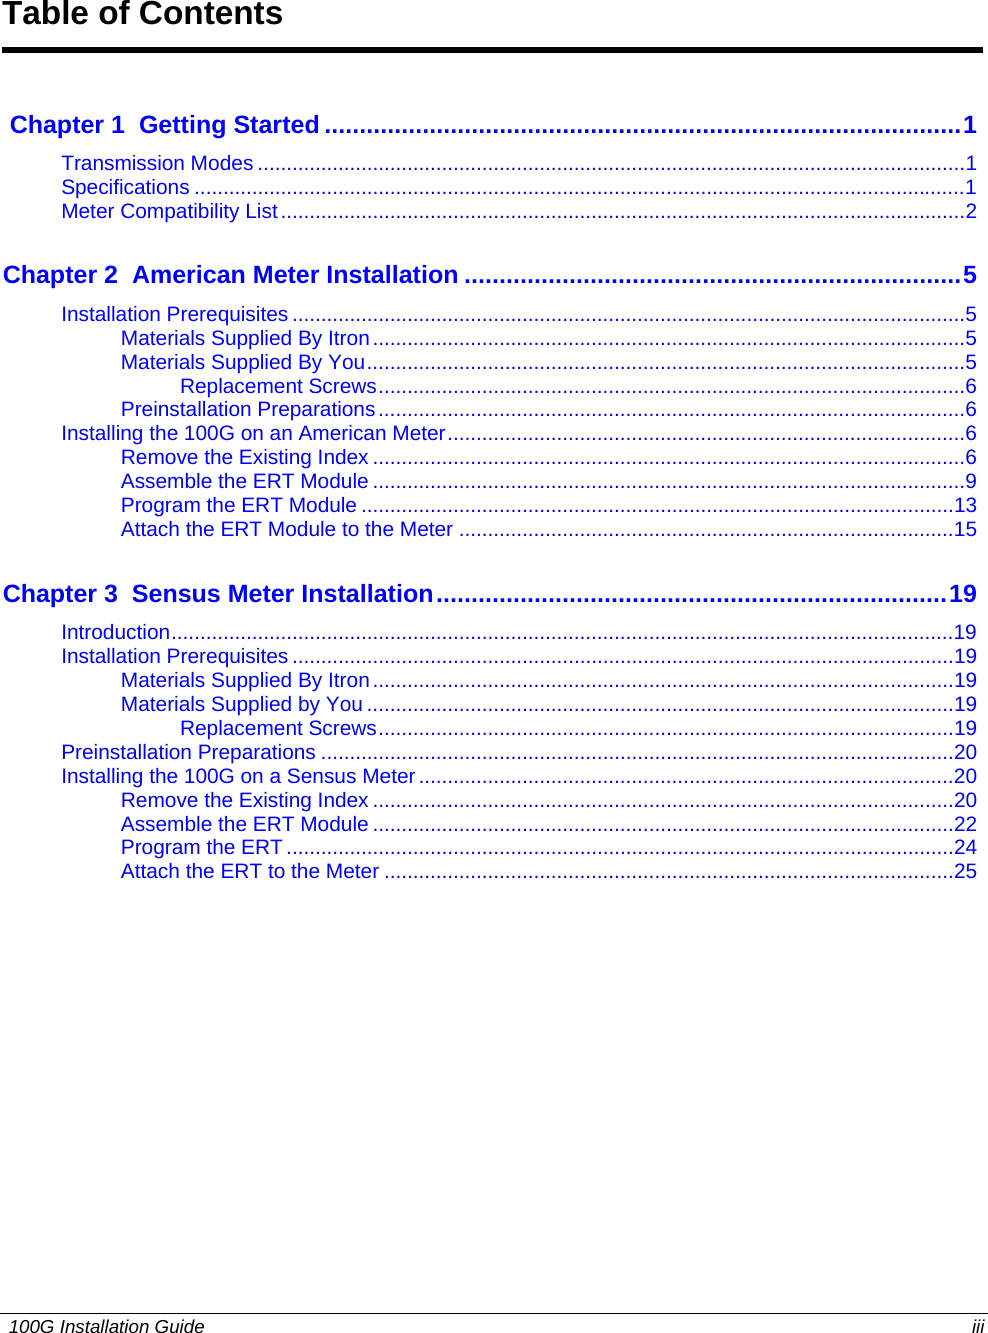  Table of Contents   Chapter 1  Getting Started...........................................................................................1Transmission Modes ...........................................................................................................................1 Specifications ......................................................................................................................................1 Meter Compatibility List.......................................................................................................................2 Chapter 2  American Meter Installation .......................................................................5Installation Prerequisites .....................................................................................................................5 Materials Supplied By Itron.......................................................................................................5 Materials Supplied By You........................................................................................................5 Replacement Screws......................................................................................................6 Preinstallation Preparations......................................................................................................6 Installing the 100G on an American Meter..........................................................................................6 Remove the Existing Index .......................................................................................................6 Assemble the ERT Module .......................................................................................................9 Program the ERT Module .......................................................................................................13 Attach the ERT Module to the Meter ......................................................................................15 Chapter 3  Sensus Meter Installation.........................................................................19Introduction........................................................................................................................................19 Installation Prerequisites ...................................................................................................................19 Materials Supplied By Itron.....................................................................................................19 Materials Supplied by You ......................................................................................................19 Replacement Screws....................................................................................................19 Preinstallation Preparations ..............................................................................................................20 Installing the 100G on a Sensus Meter.............................................................................................20 Remove the Existing Index .....................................................................................................20 Assemble the ERT Module .....................................................................................................22 Program the ERT ....................................................................................................................24 Attach the ERT to the Meter ...................................................................................................25    100G Installation Guide  iii  